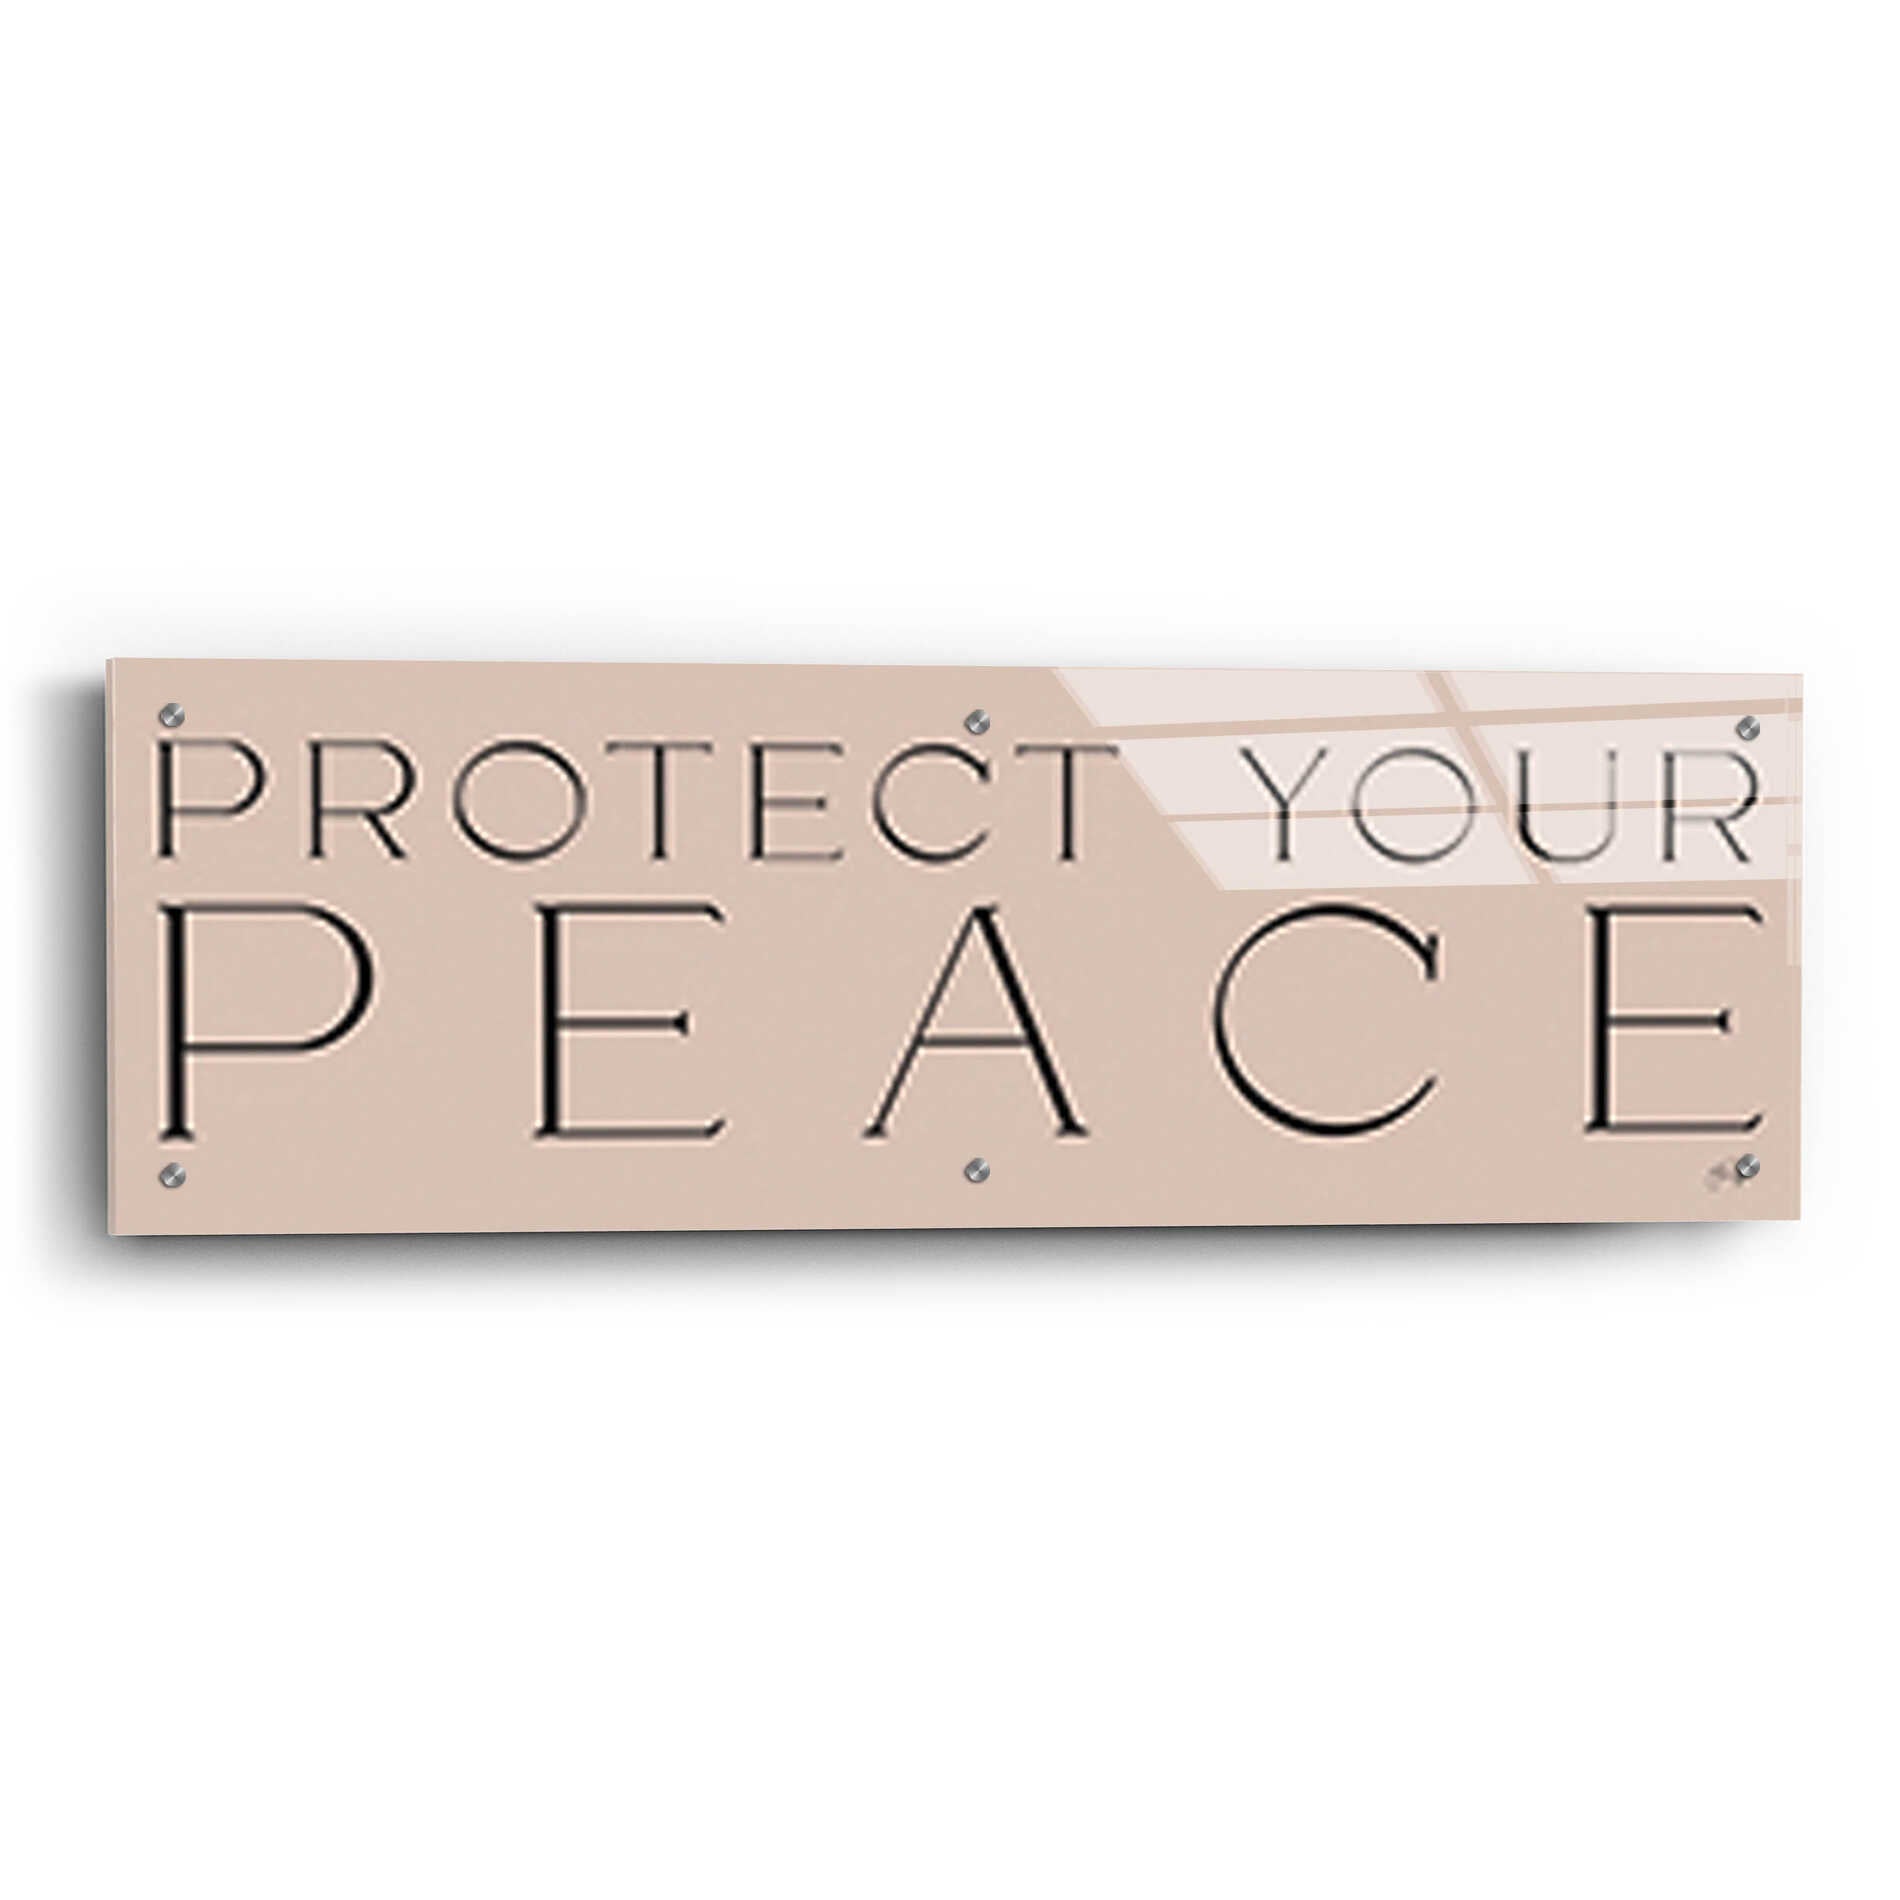 Epic Art 'Protect Your Peace' by Yass Naffas Designs, Acrylic Glass Wall Art,36x12